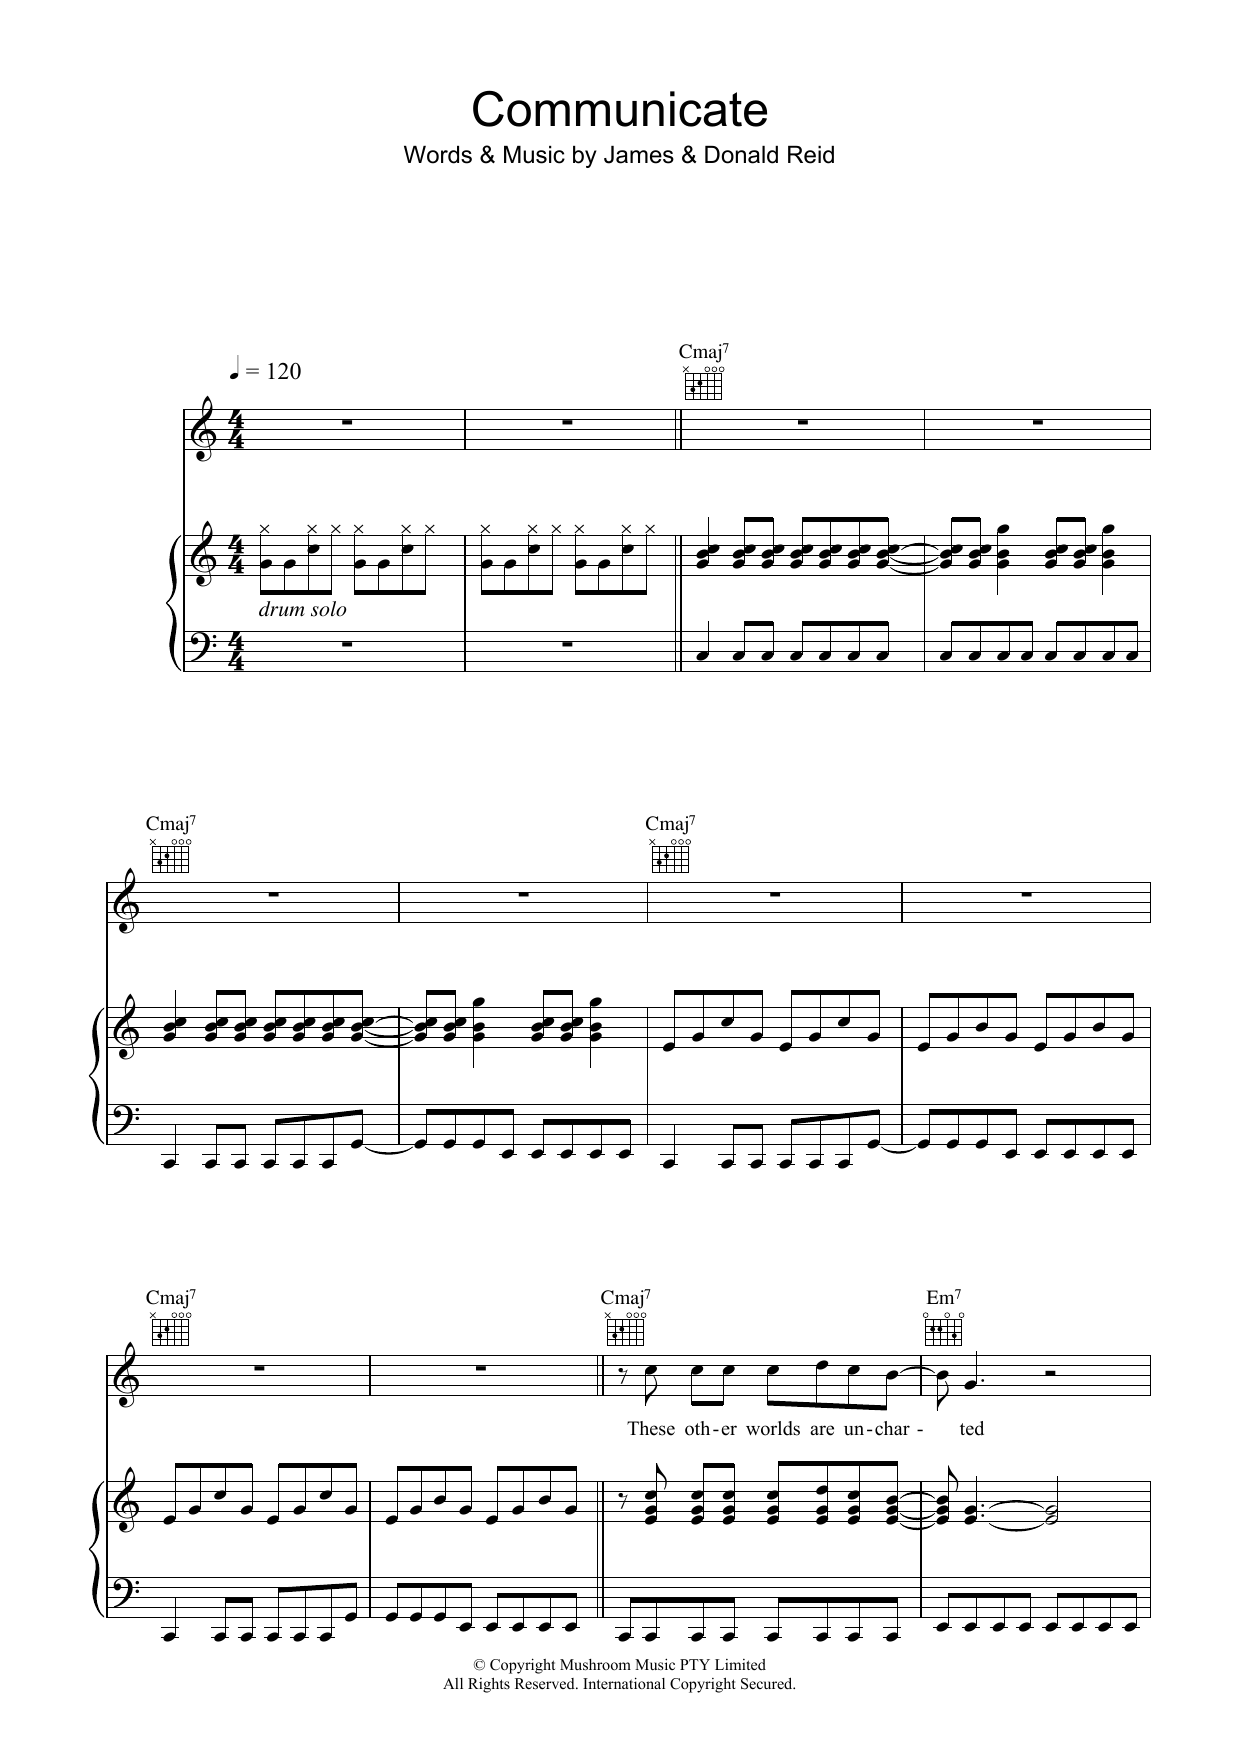 Download The Feelers Communicate Sheet Music